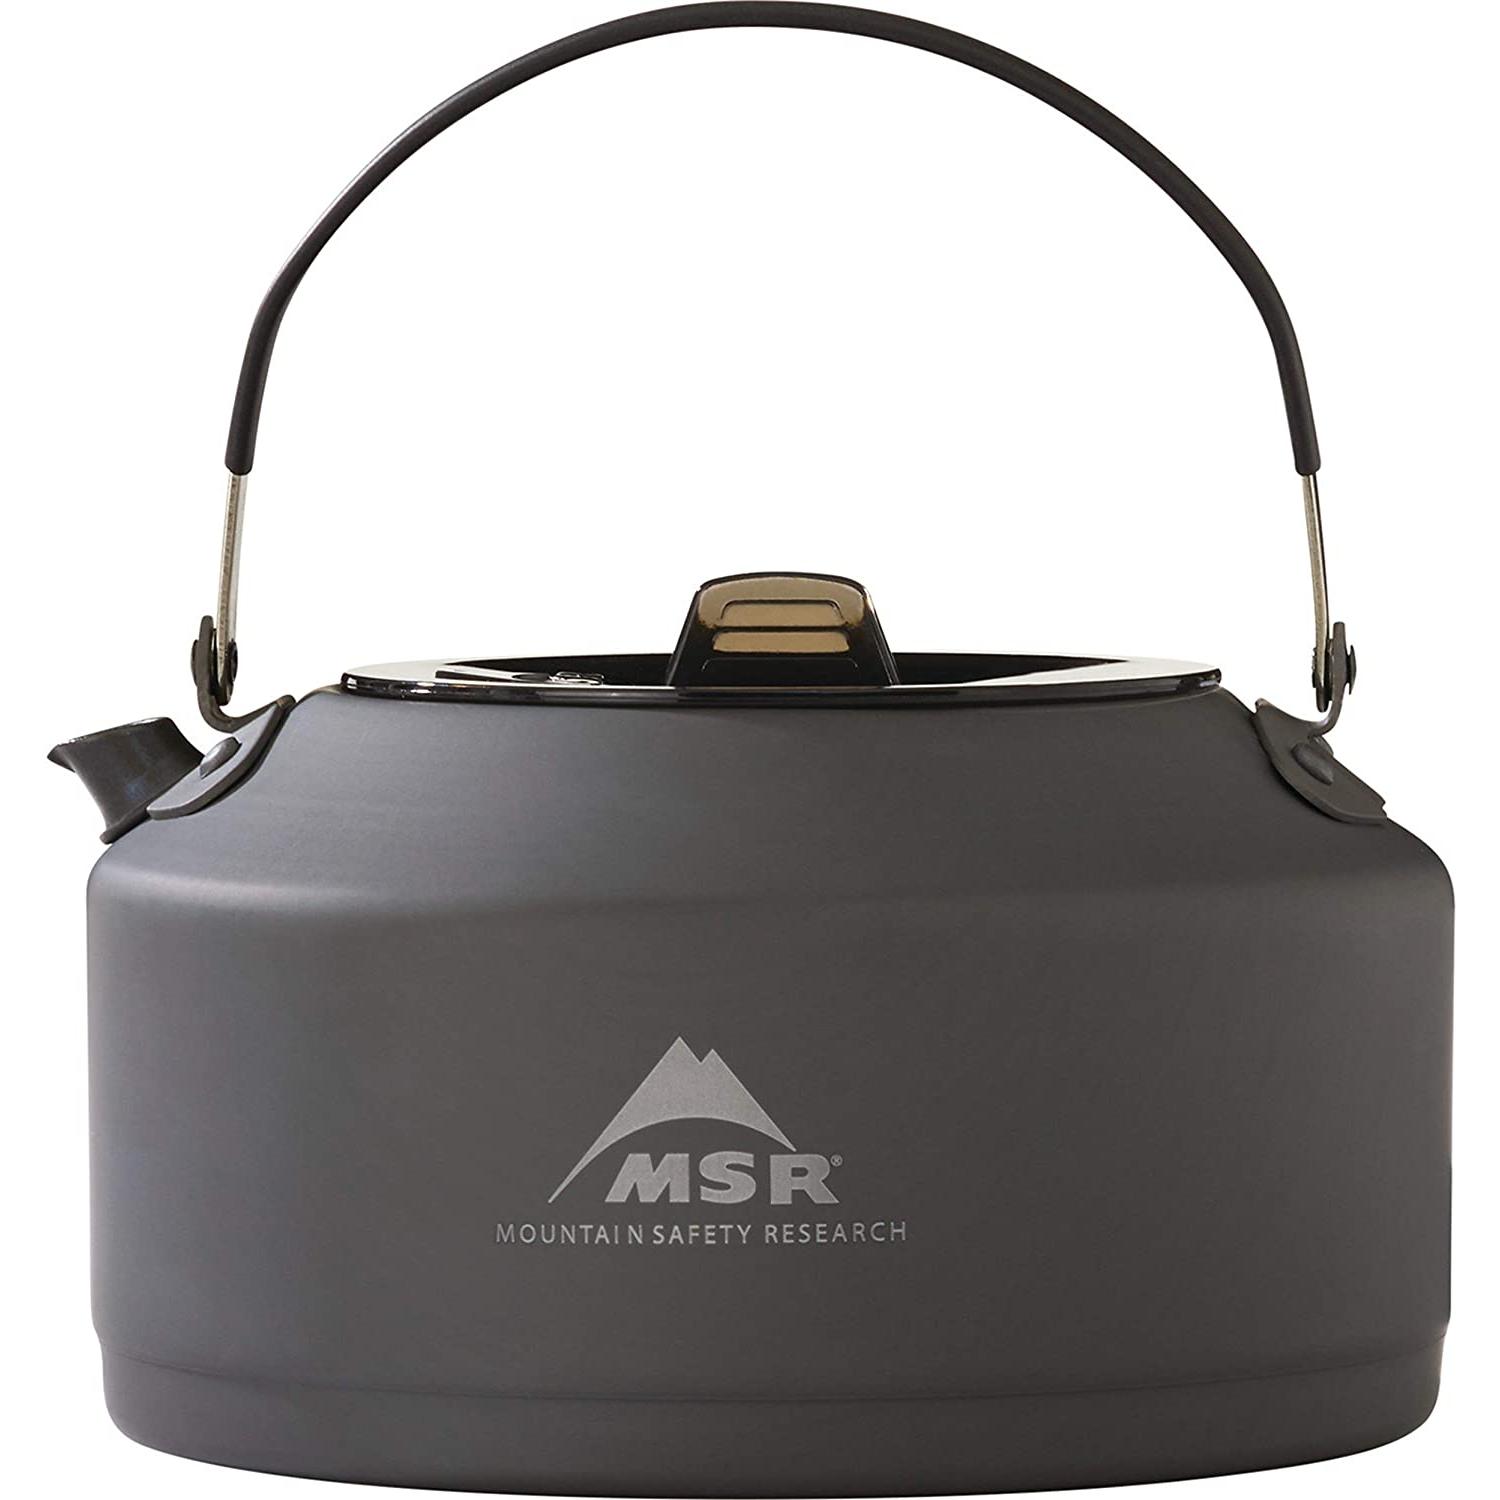 MSR Pika Ultralight Aluminum Teapot for Camping and Backpacking (1-Liter)